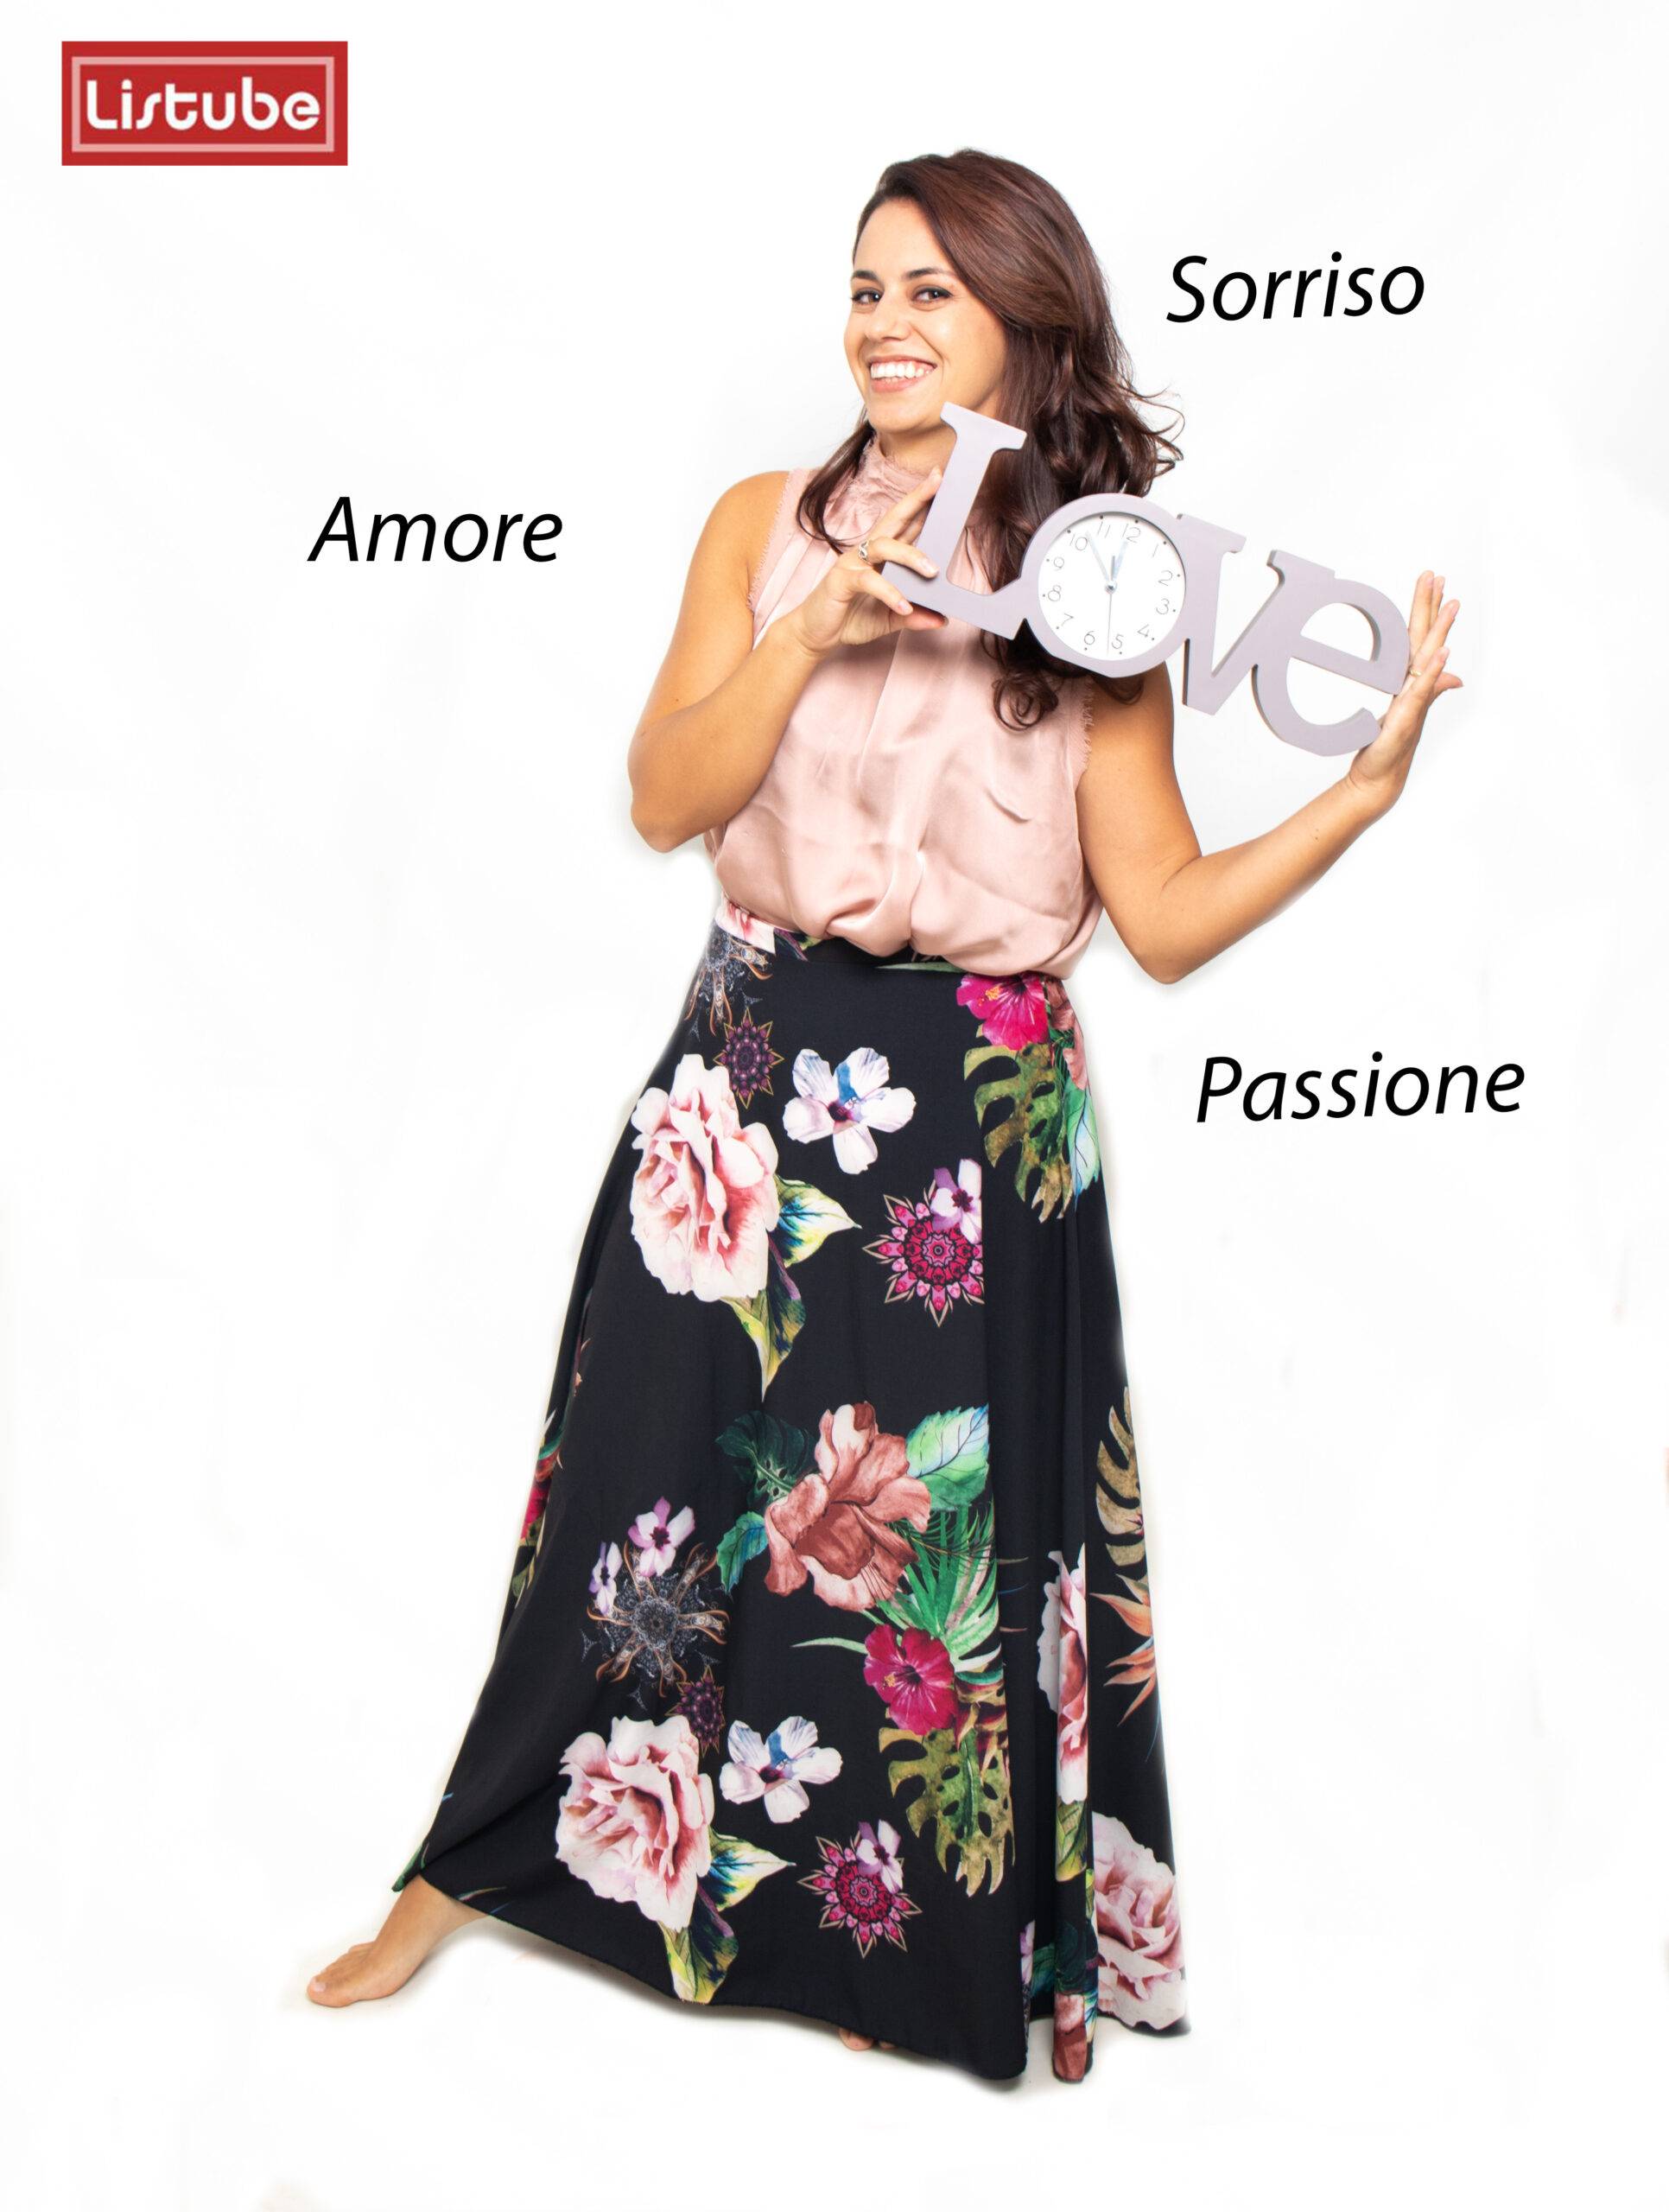 sorriso amore passione scaled